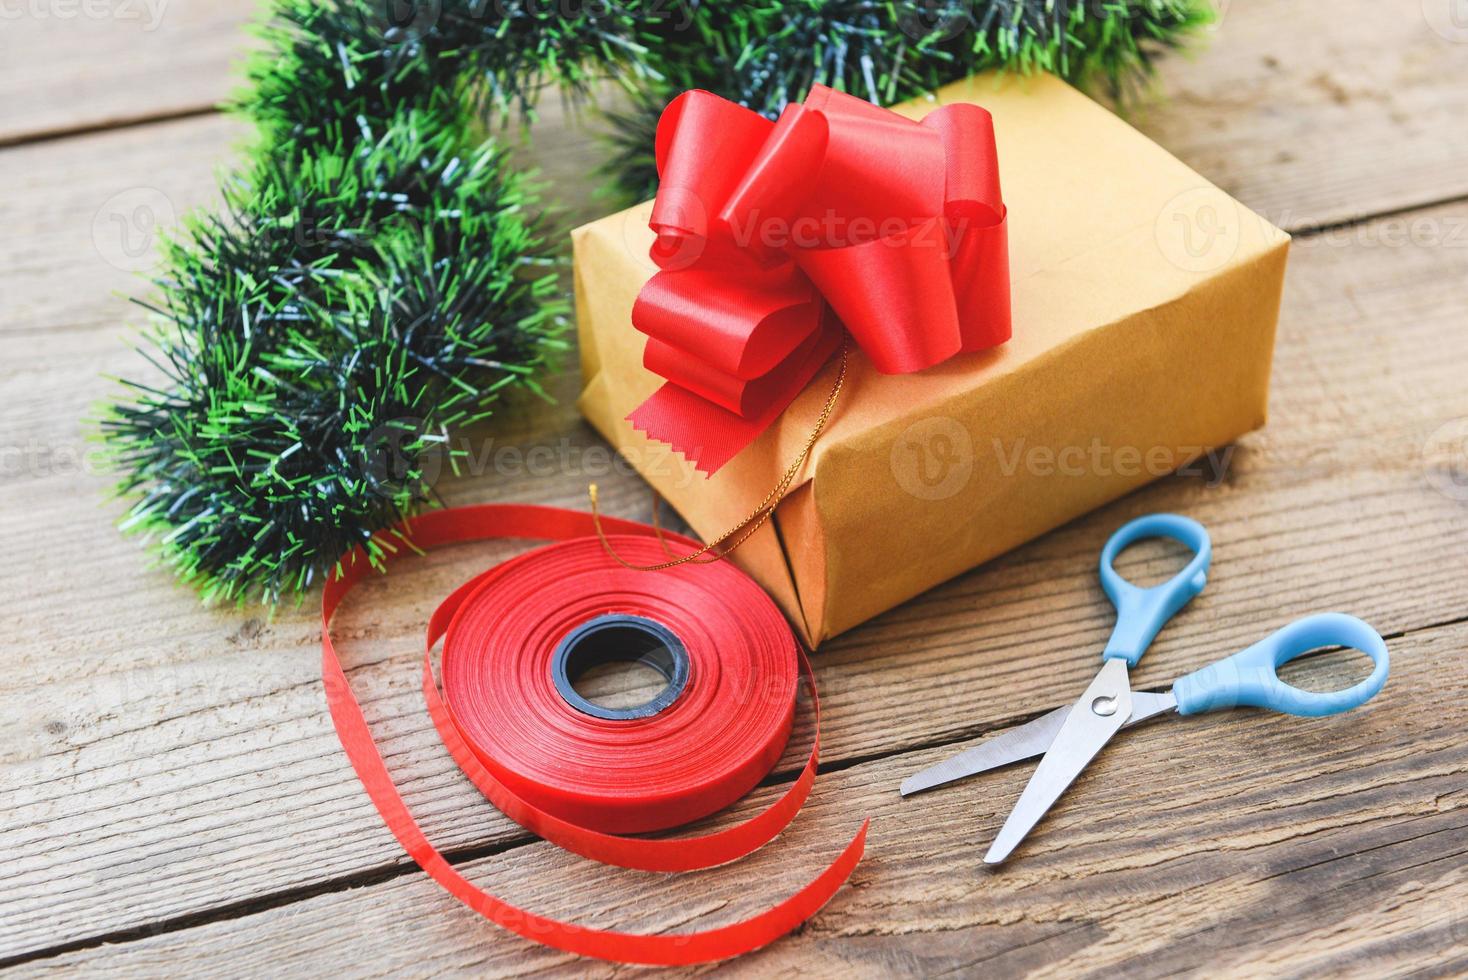 diy gift concept Homemade wrapped christmas presents with tools and decorations on wooden , DIY hobby gift box wrapped brown paper collection in for christmas or new year photo